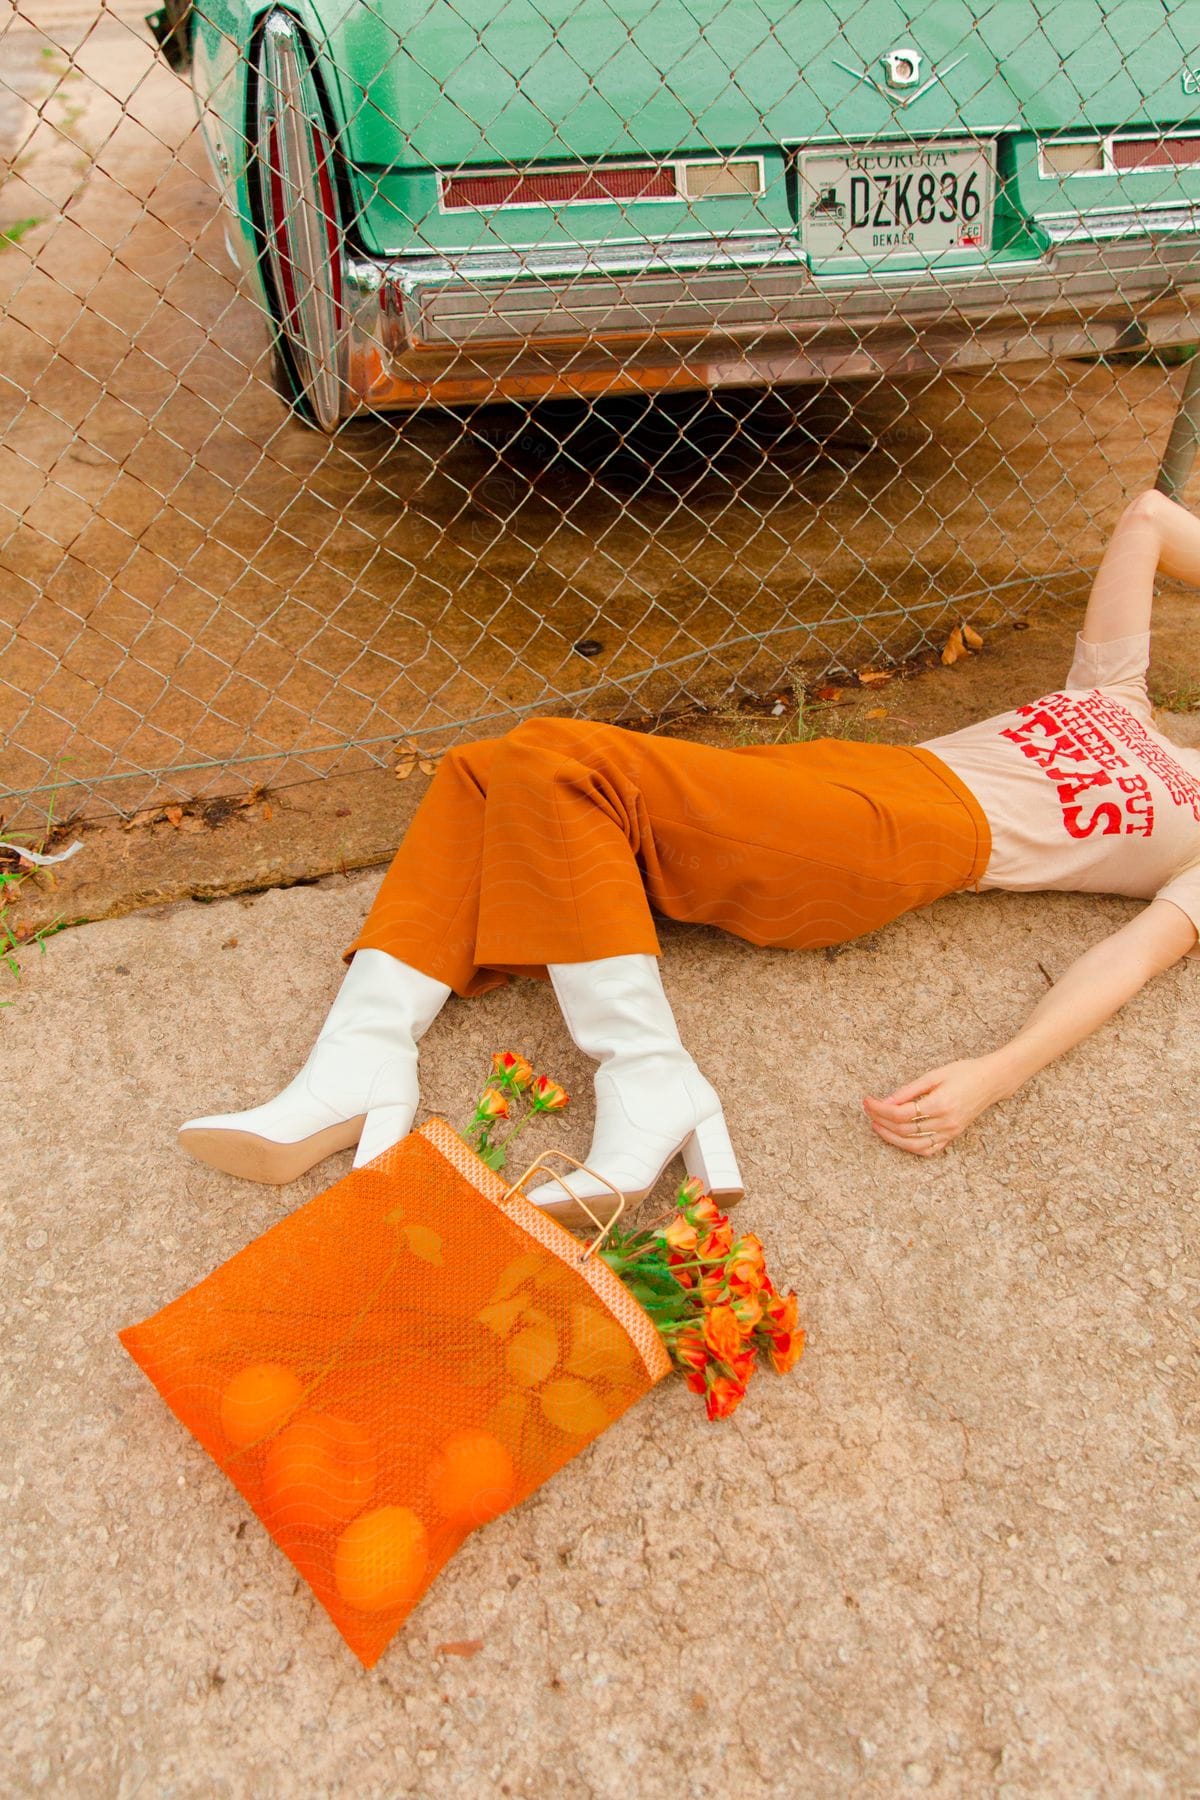 Woman lying down on the floor next to a bag of groceries